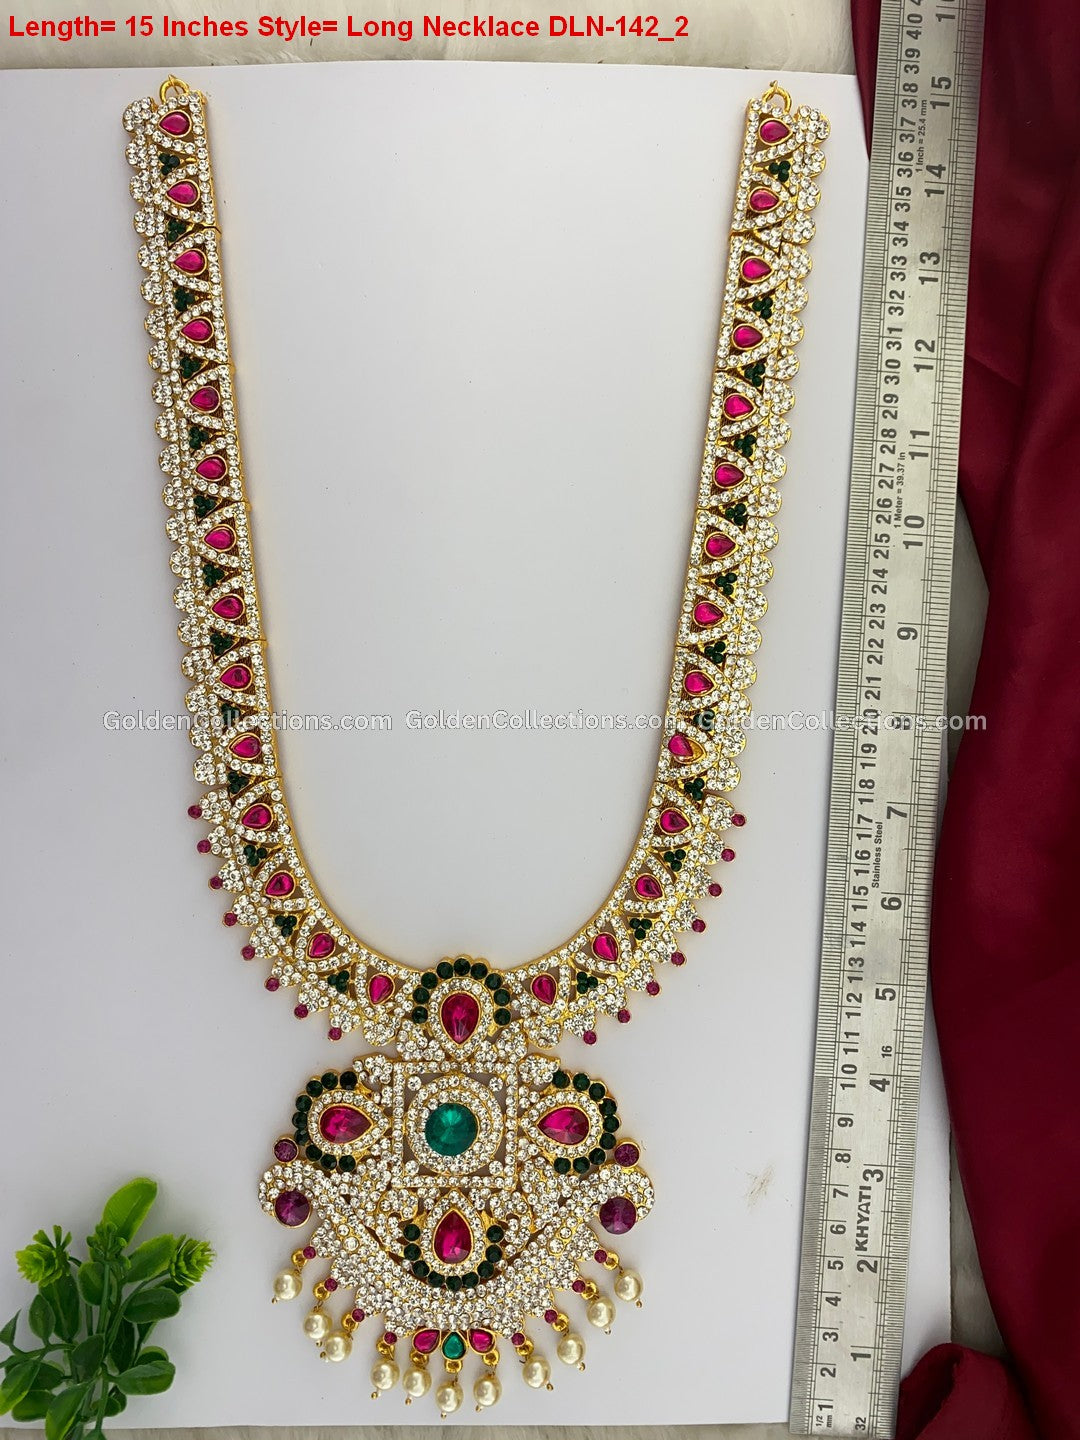 Hindu God Jewellery in Gold - GoldenCollections DLN-142 2